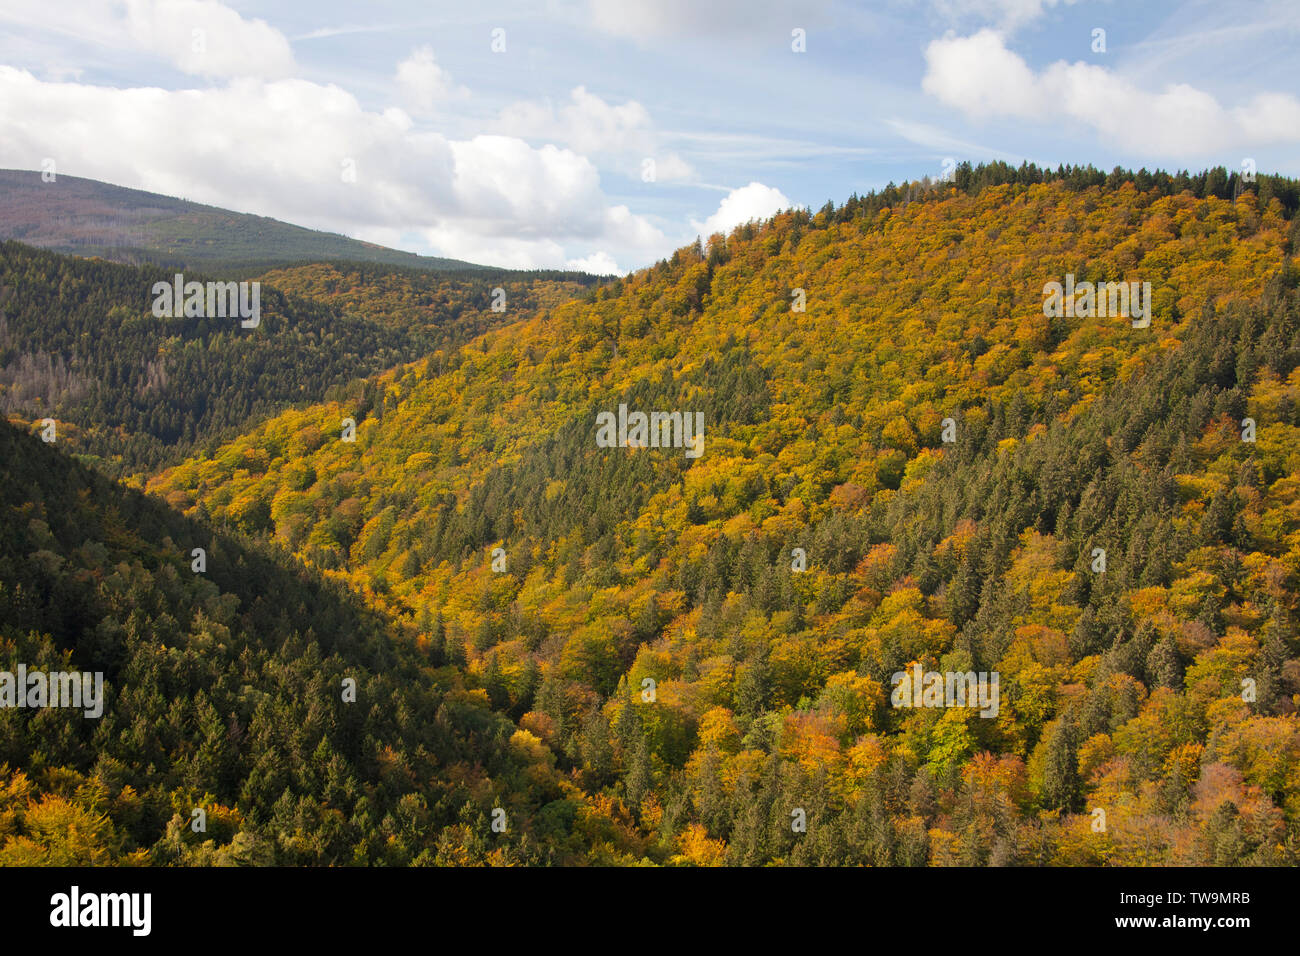 View from the Ilsestein into the Ilse Valley, Harz National Park, Saxony-Anhalt, Germany Stock Photo